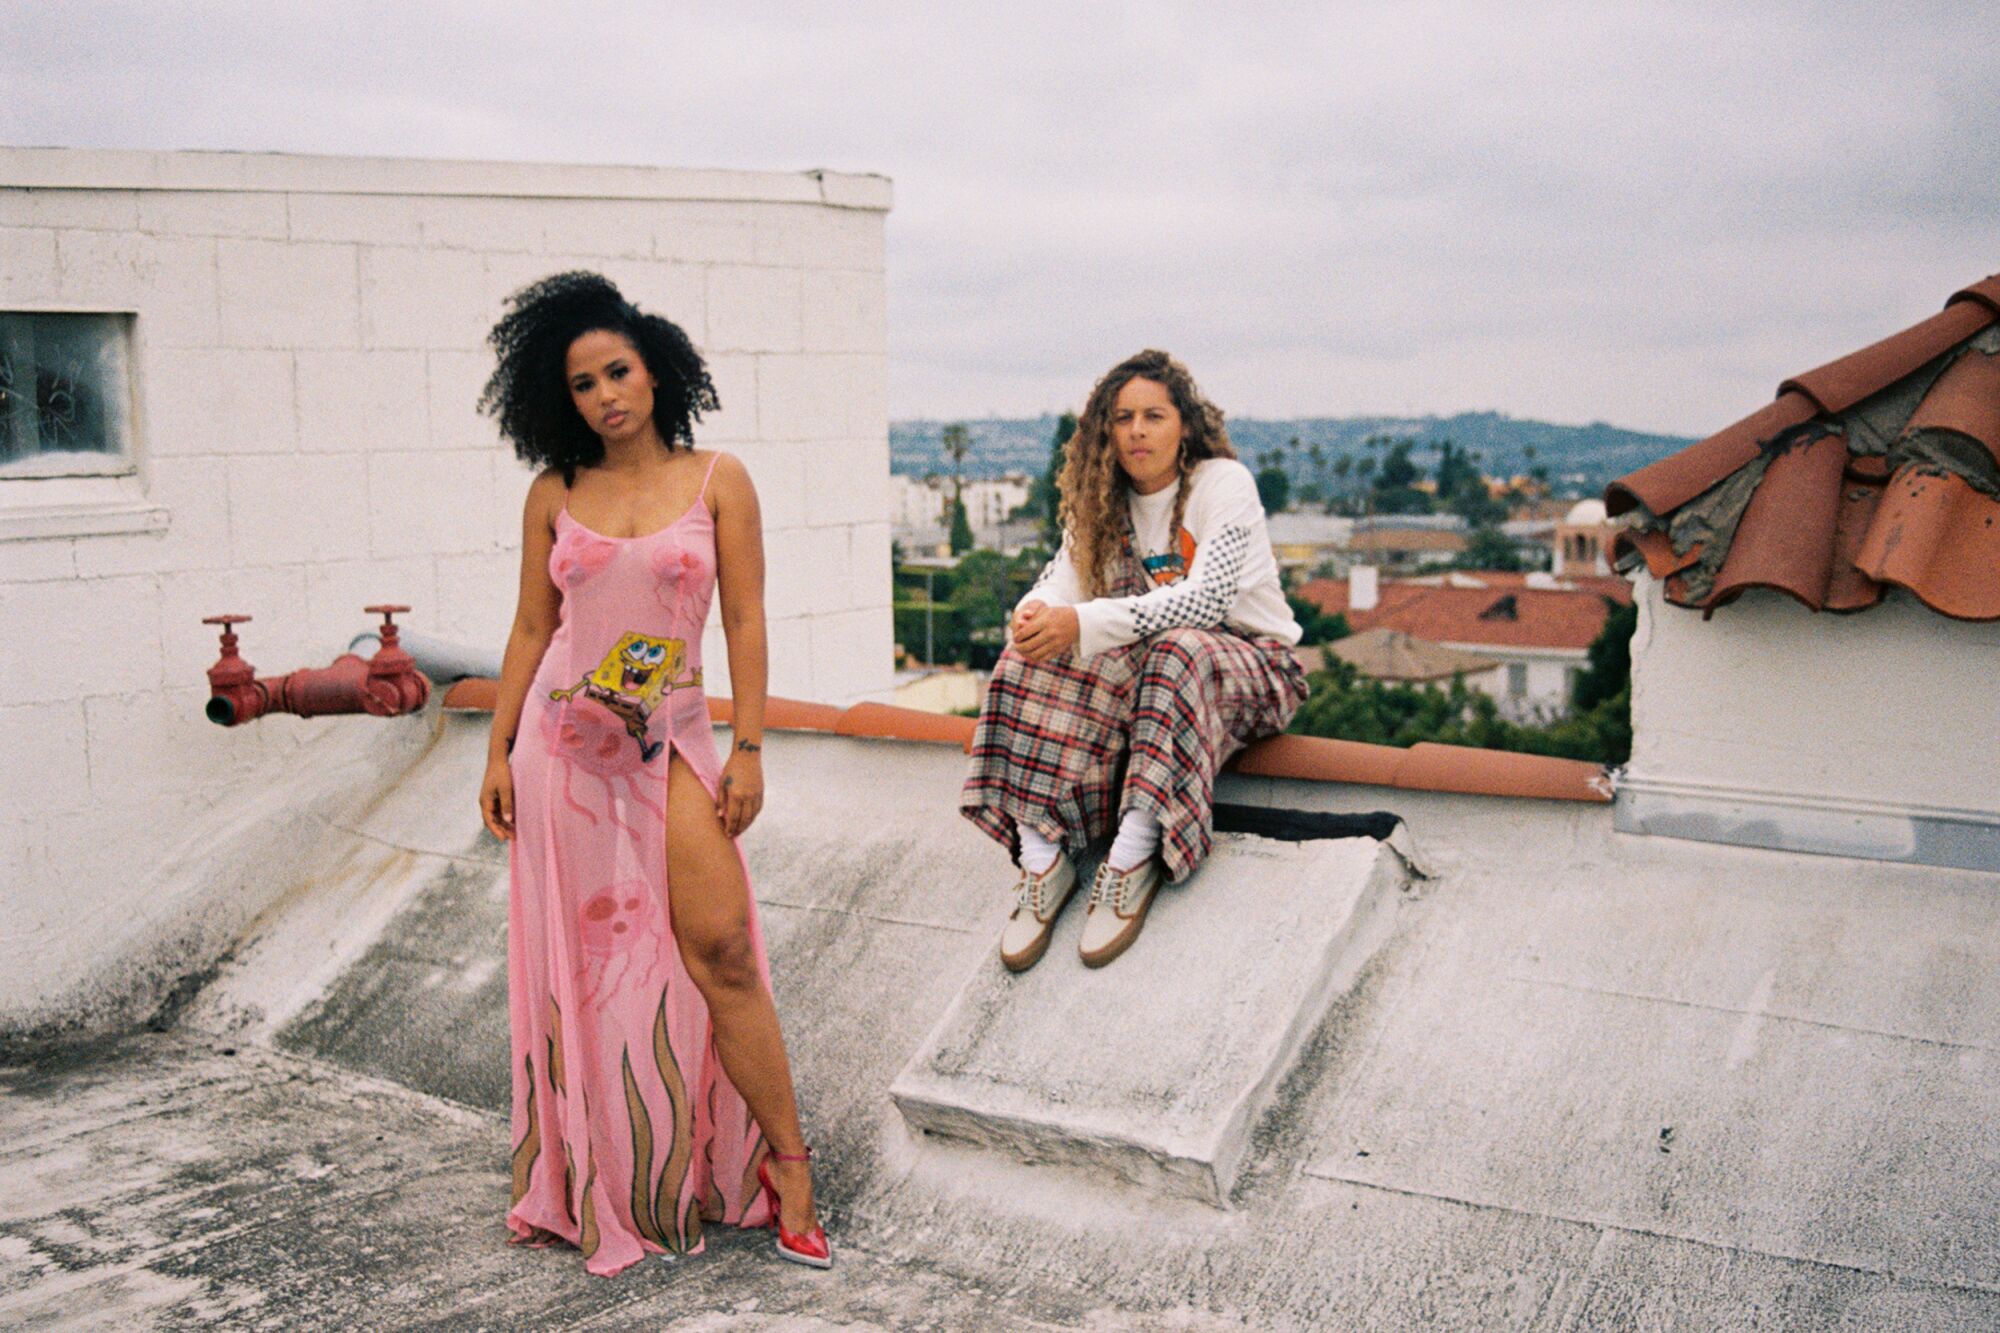 Two people on a residential rooftop, one standing wearing a pink dress and the other seated wearing plaid pants.